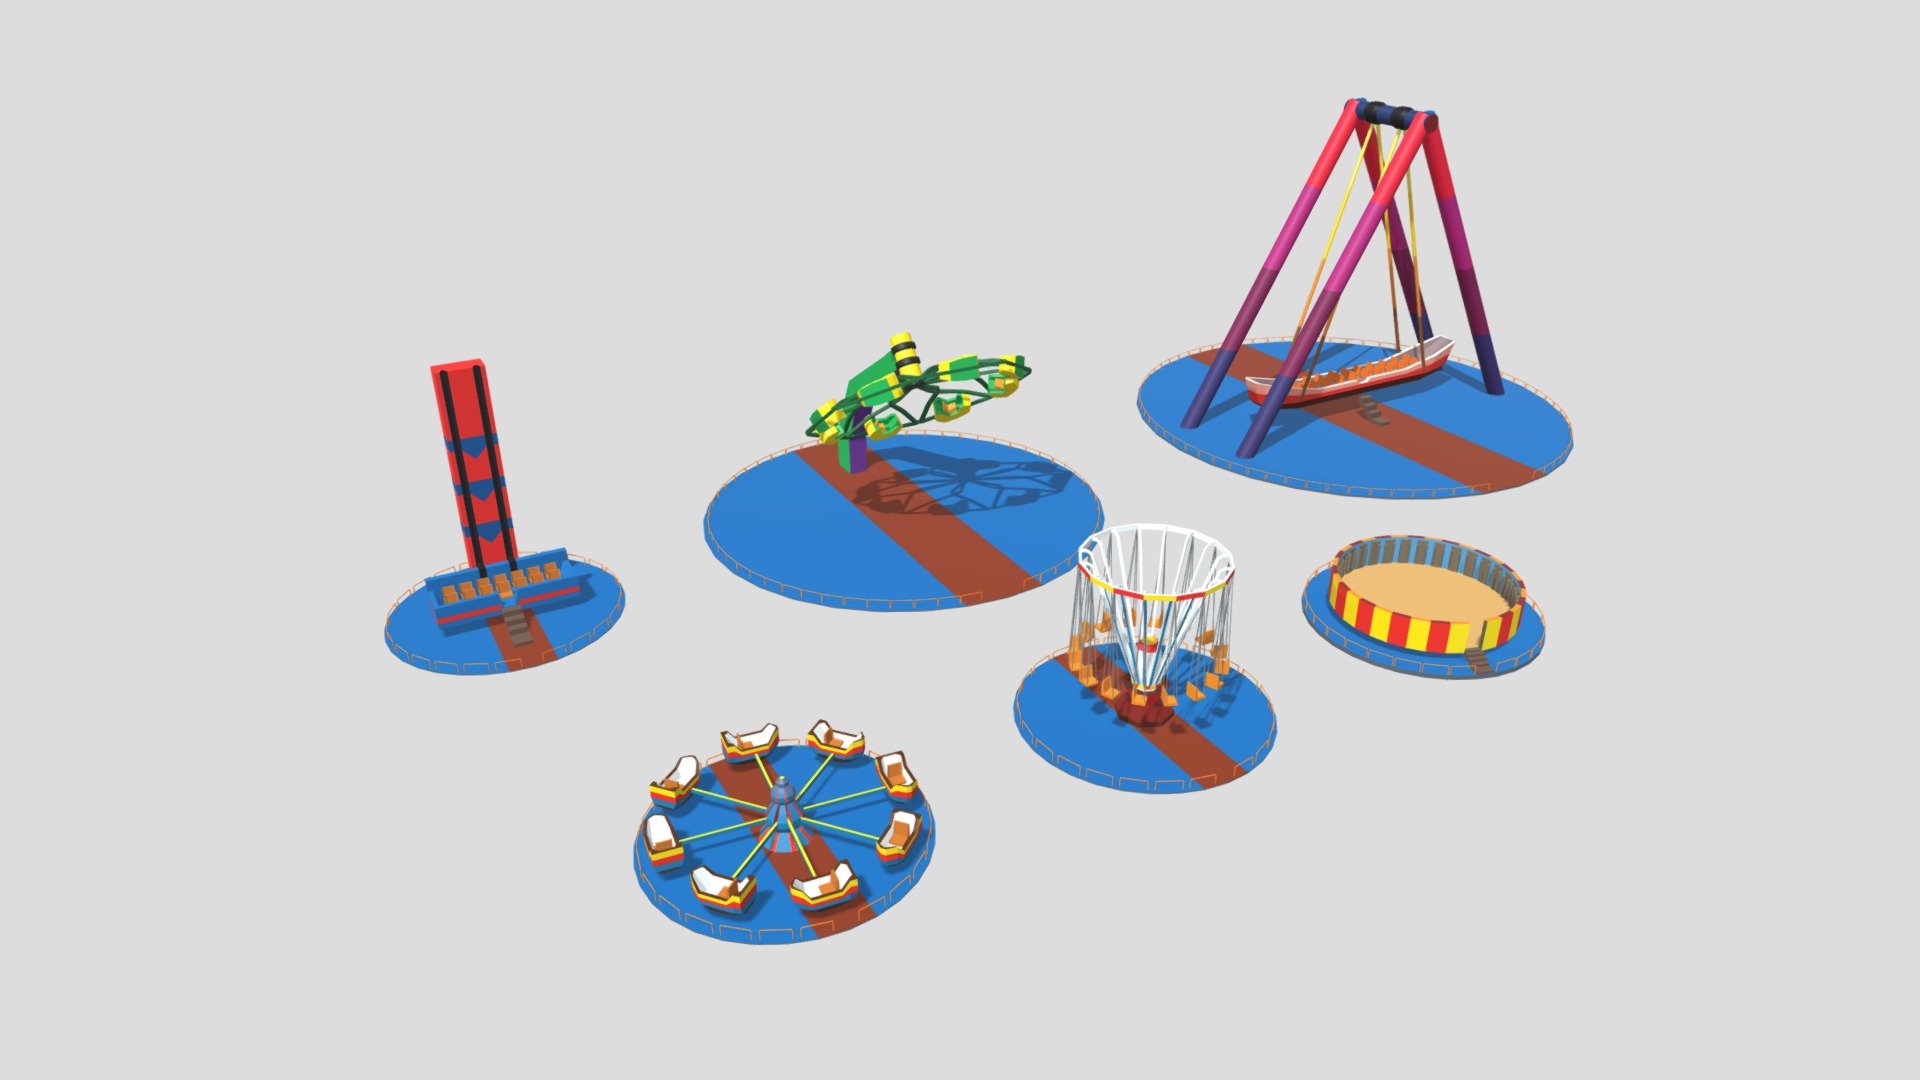 Cartoon Amusement park with Low-poly 3D models, various attractions, rides and games: different carousels, swing, tower.

6 assembled objects: tower with a falling platform, swing-ship and four carousels.

Total faces around 22 thousands - from 50 up to 3000 for each object.

1 texture - 2000x2000px PNG image with colours pallete.

Package contains demo scene with samples of animation to show how the rides can work (spin, swing, fall) 3d model